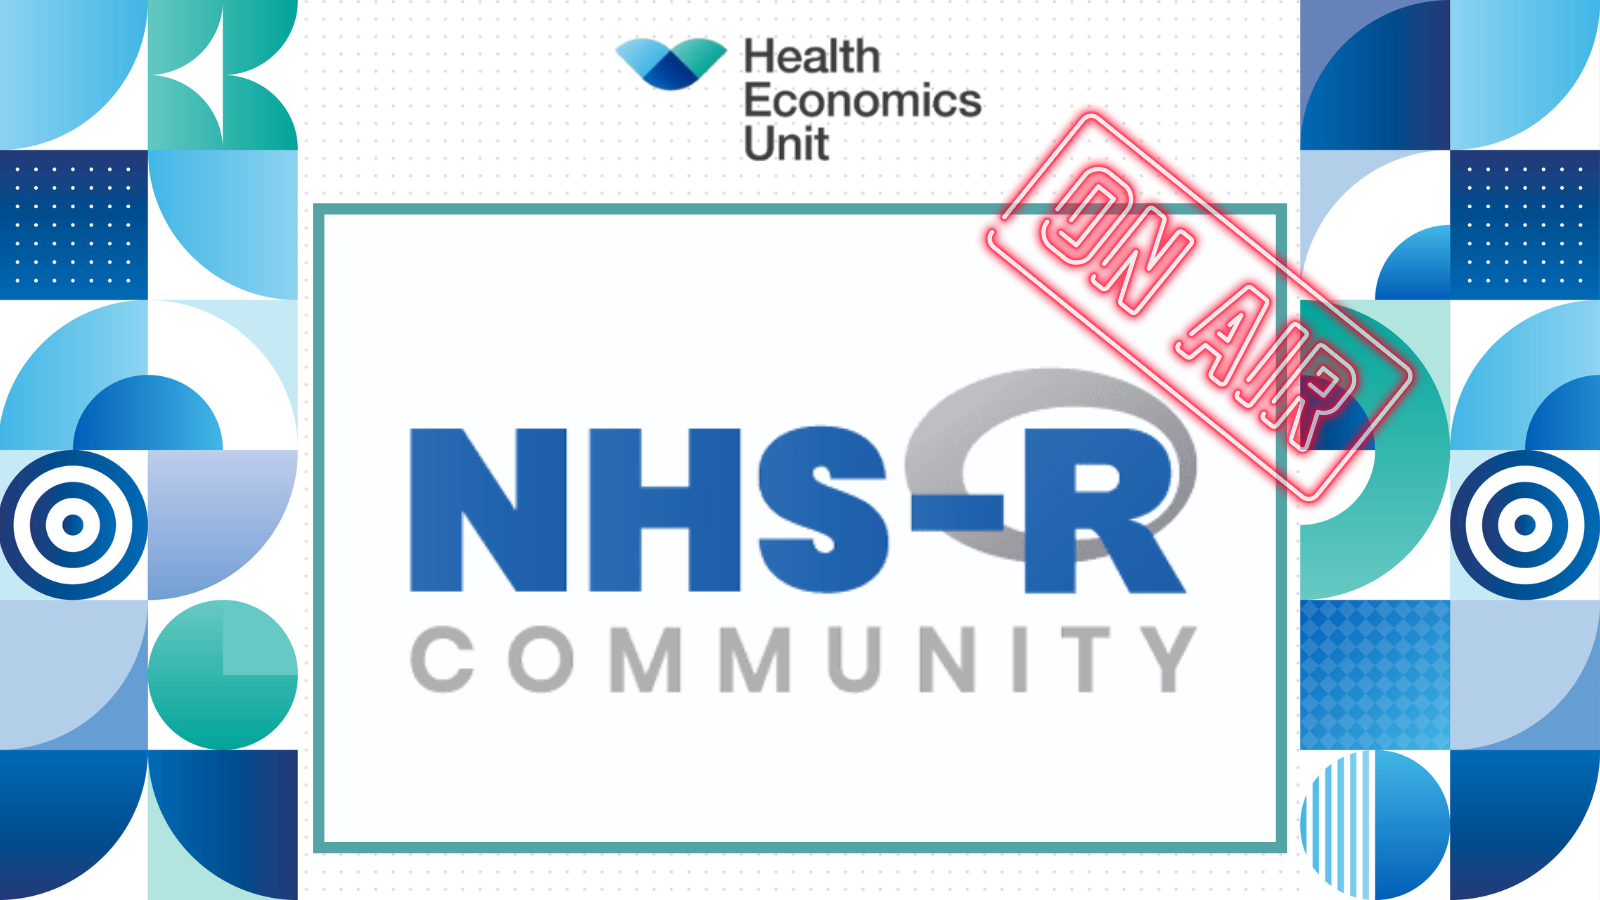 NHS-R Community Conference 2021